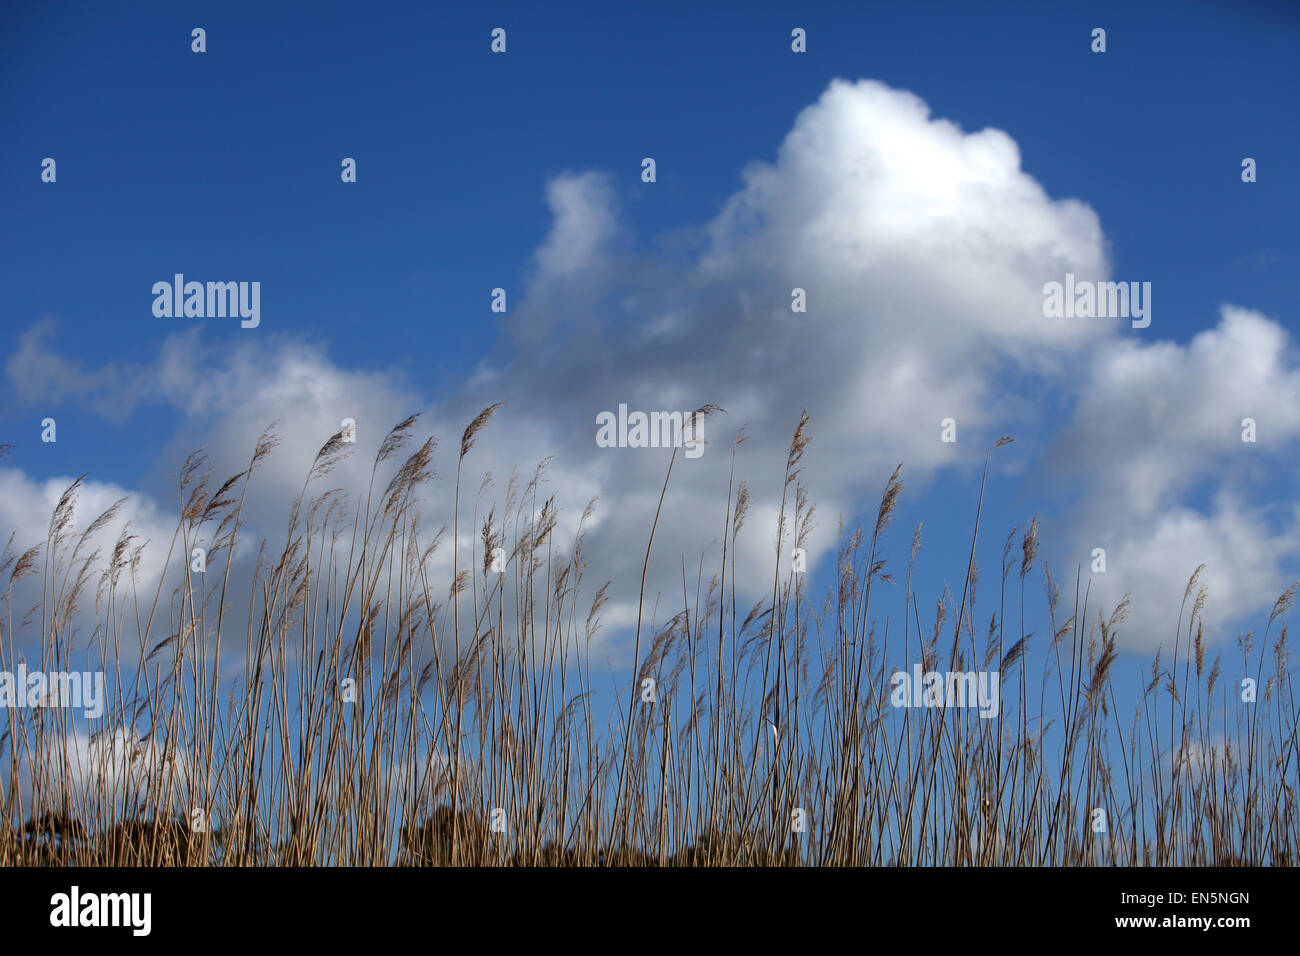 reeds against a cloudy blue sky Stock Photo